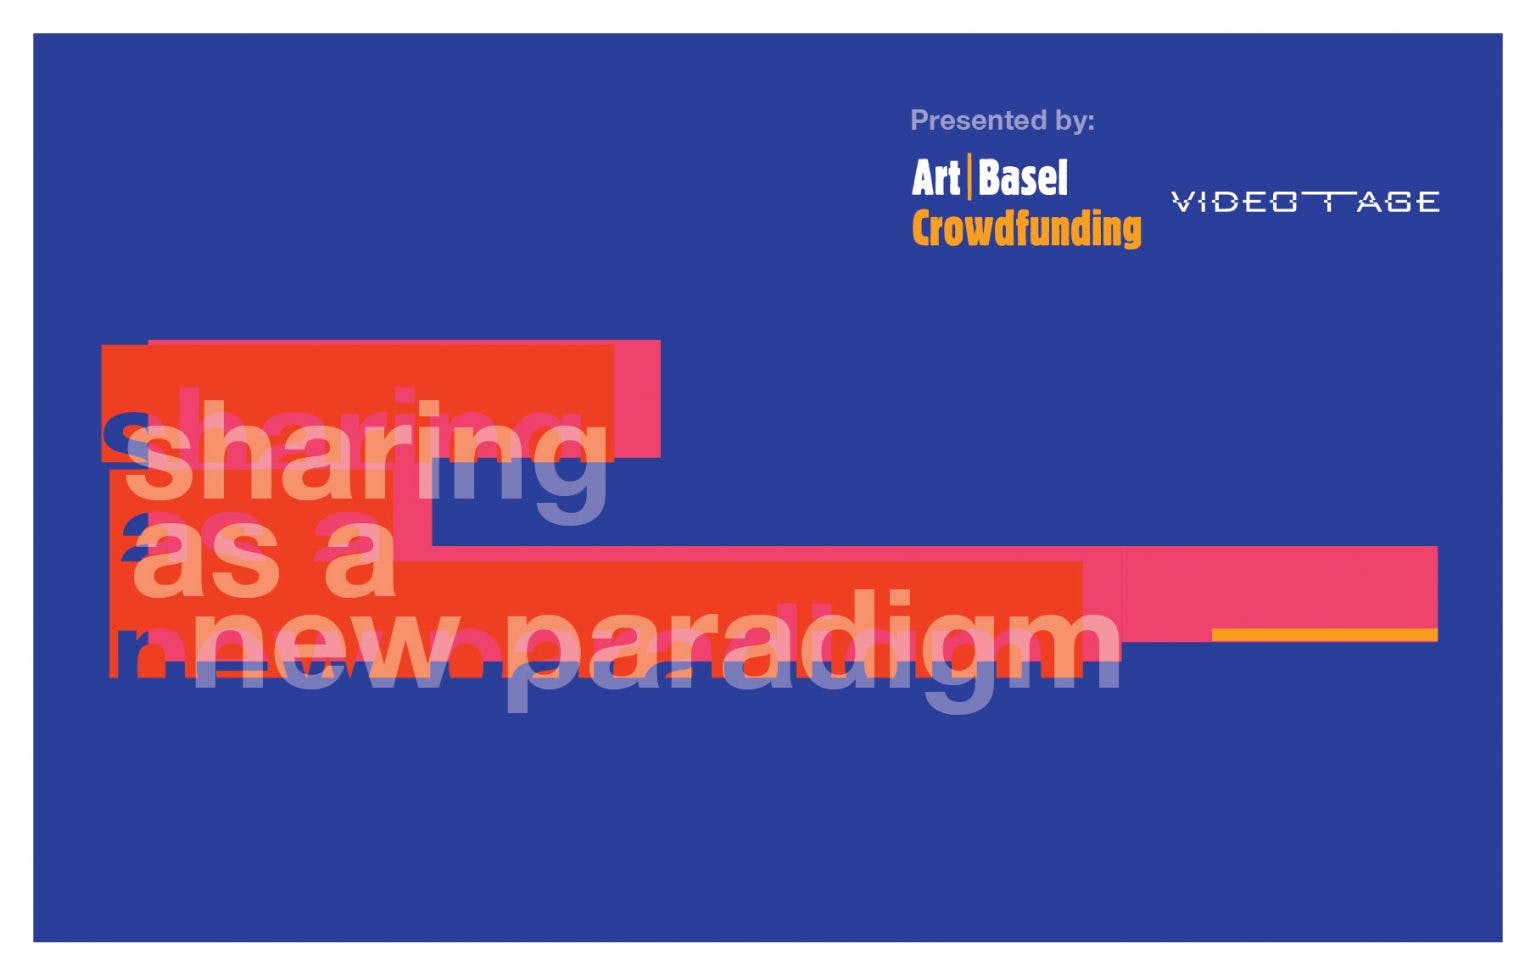 Art Basel Crowdfunding Initiative | Videotage - Sharing as a New Paradigm 